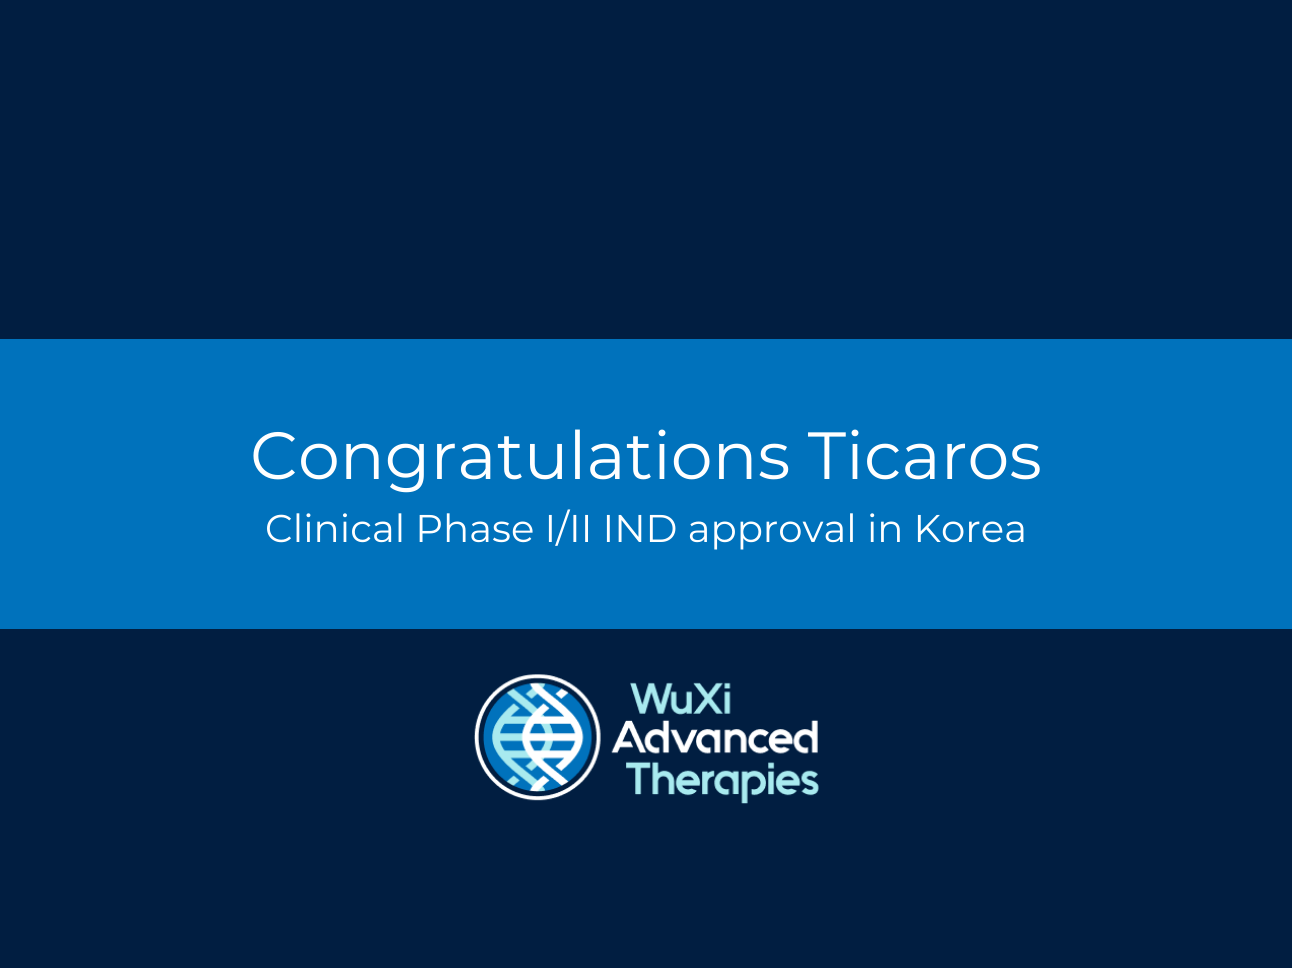 WuXi Advanced Therapies Ticaros Approval